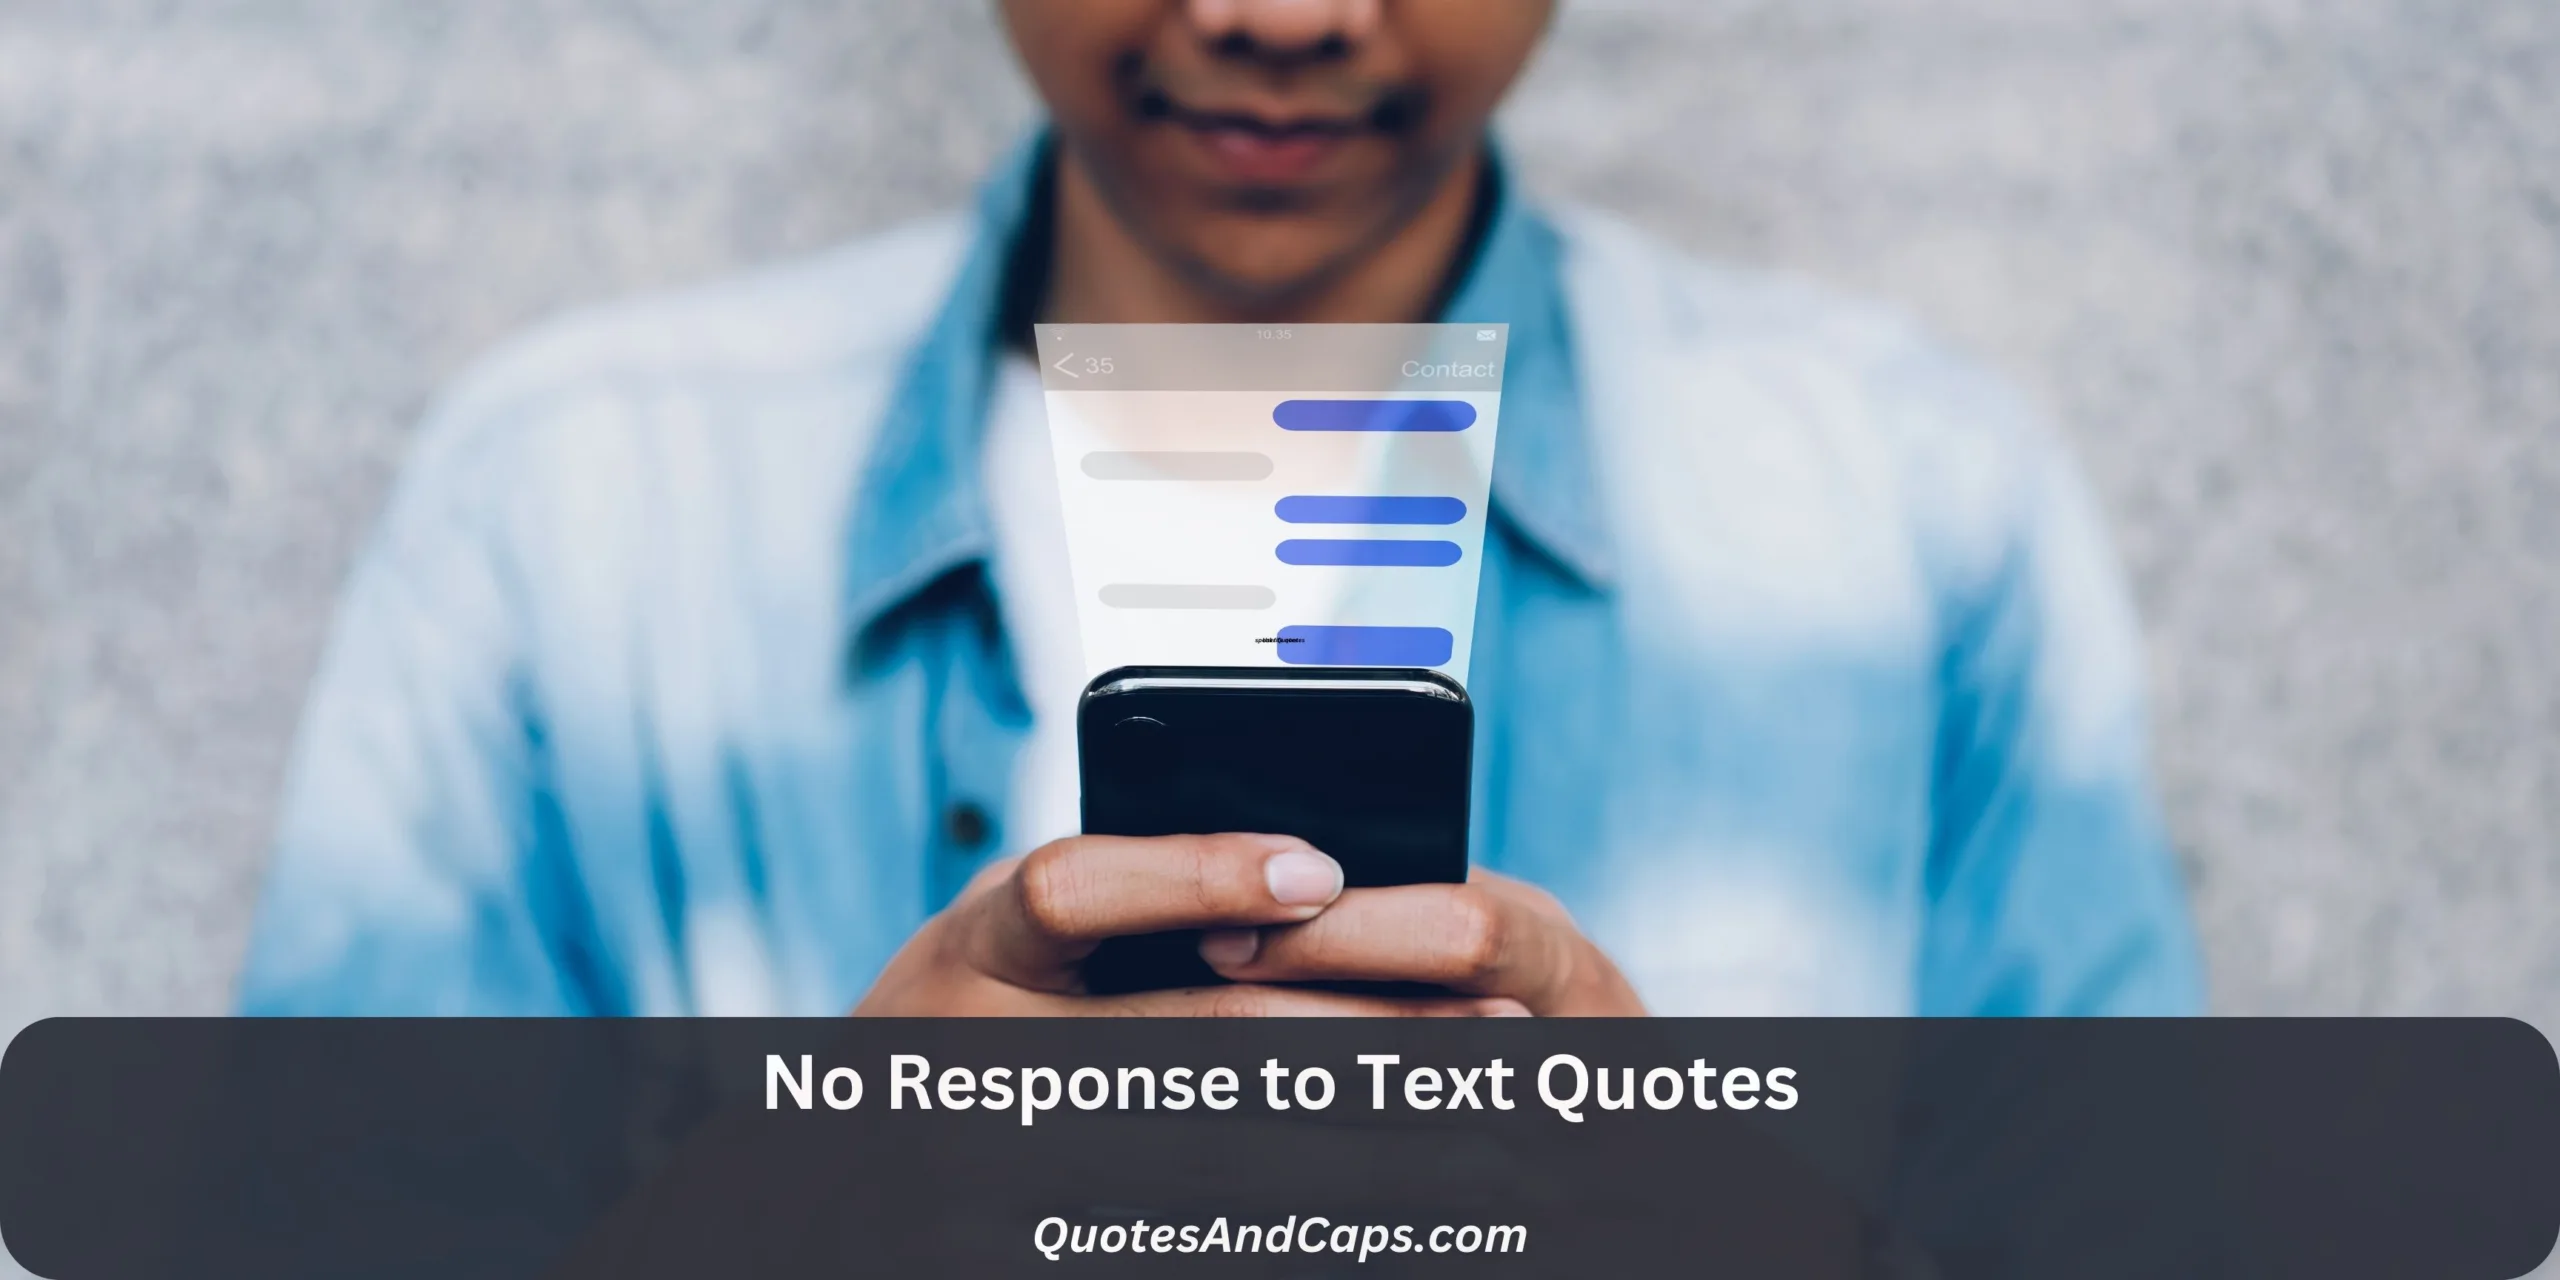 No Response to Text Quotes